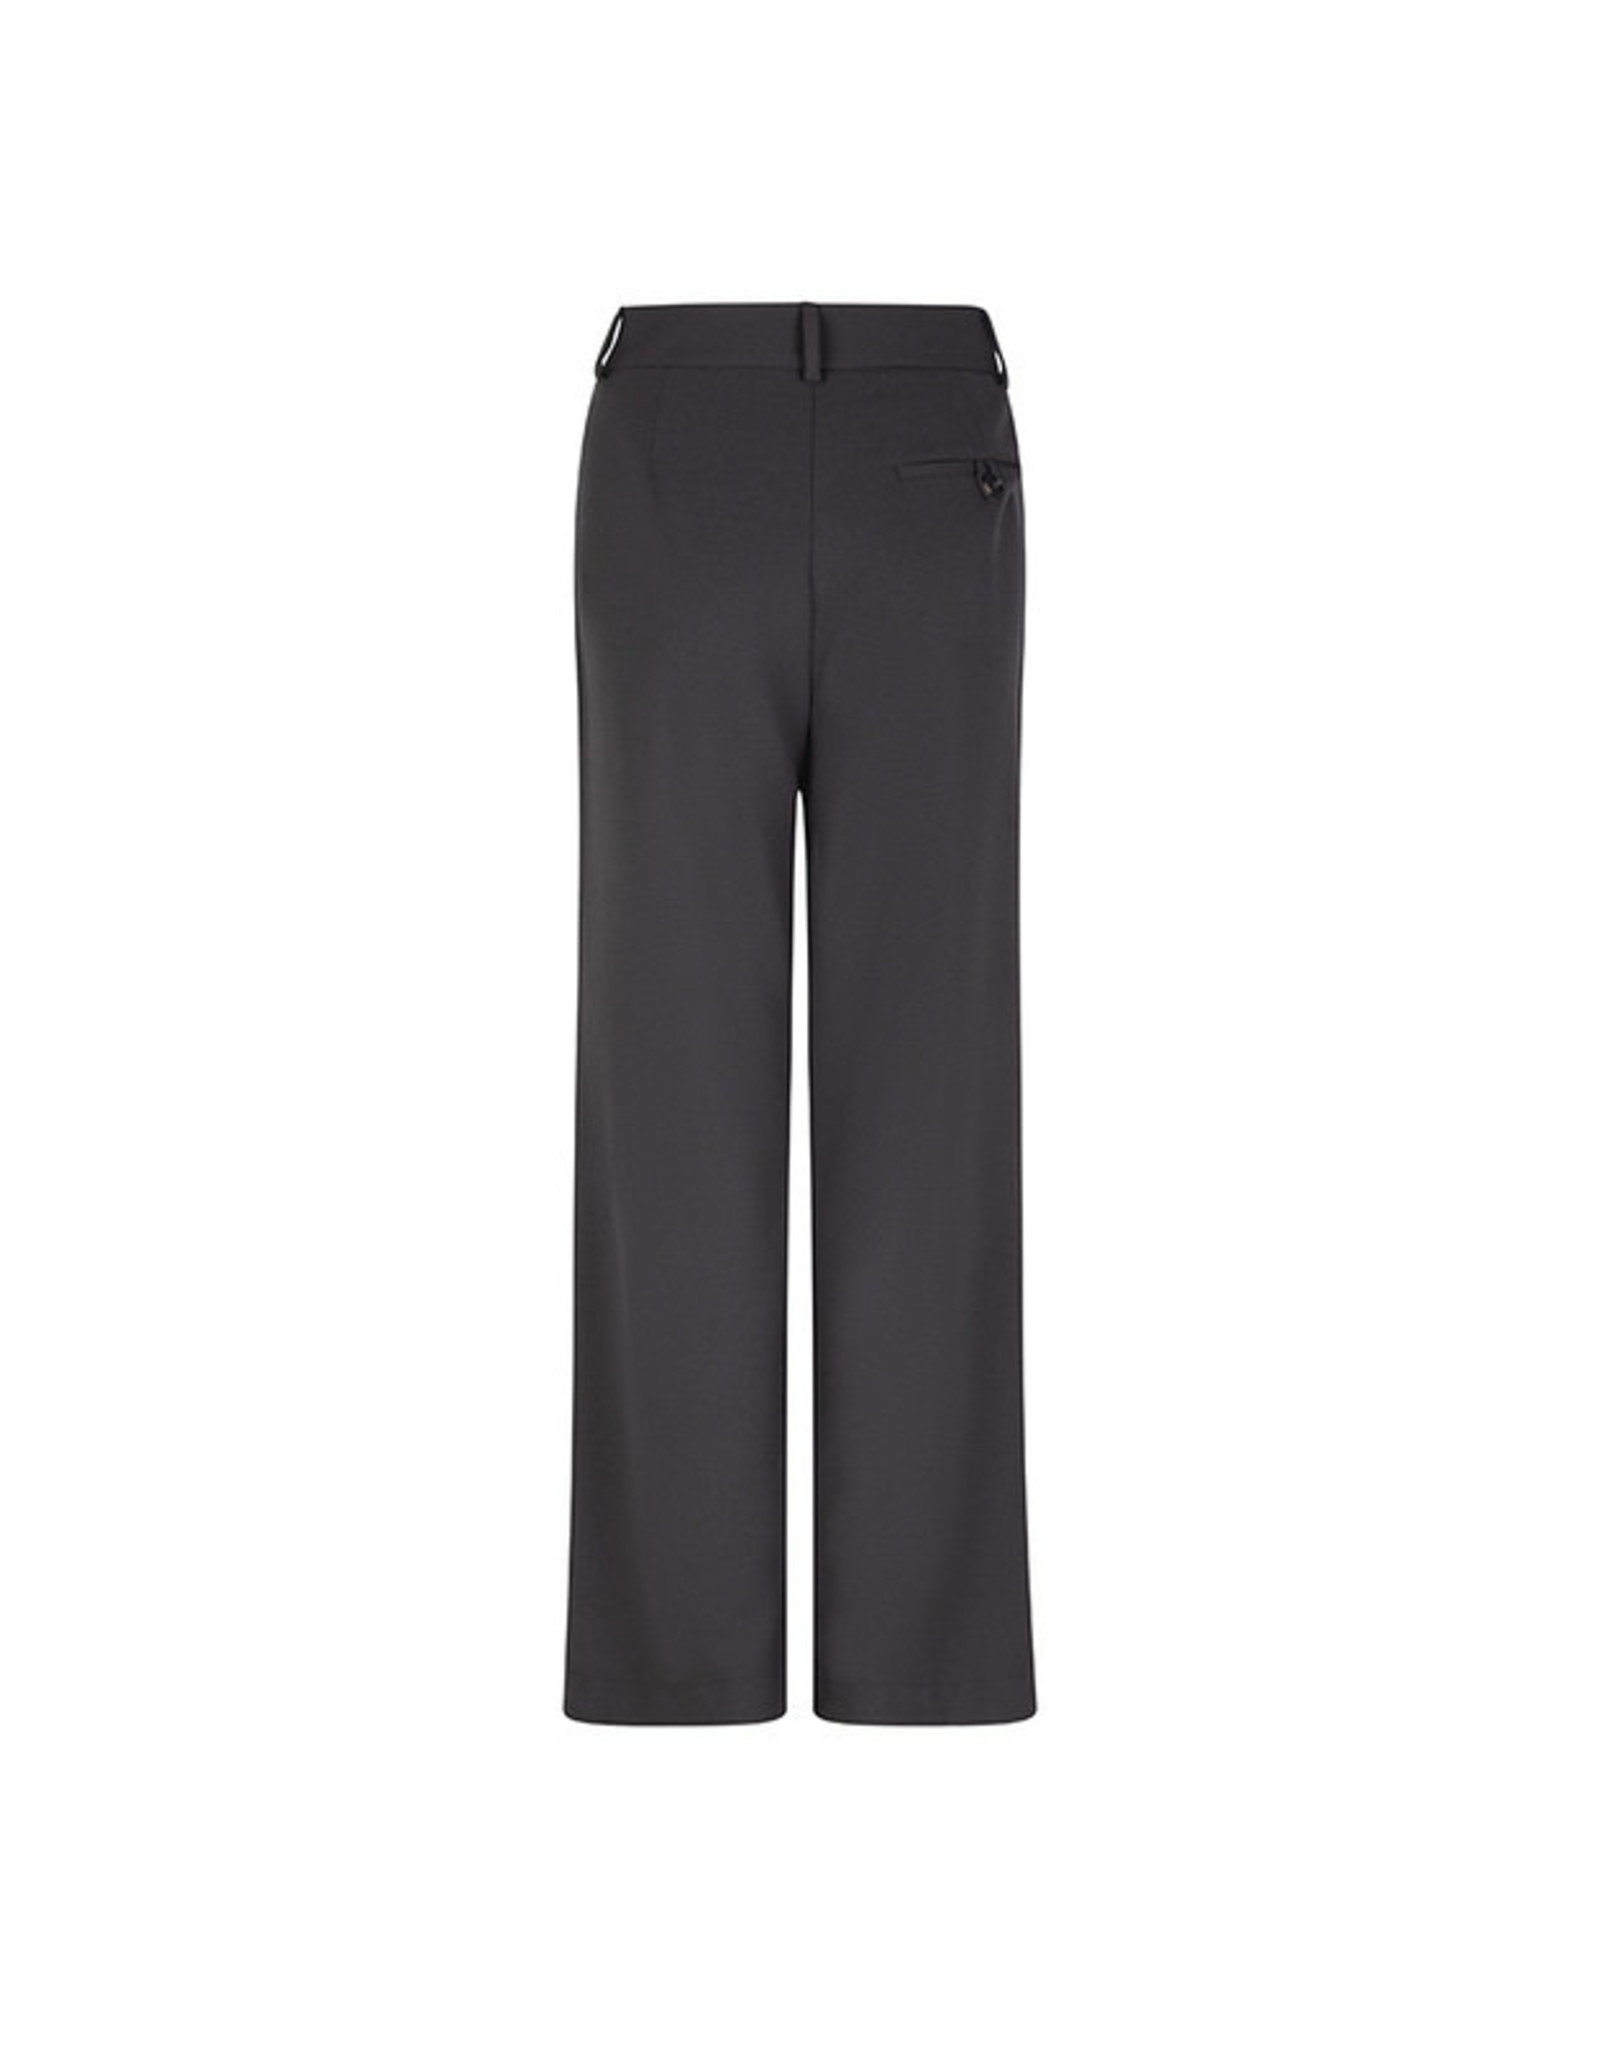 Ruby Tuesday REVI straight pants MAGNET